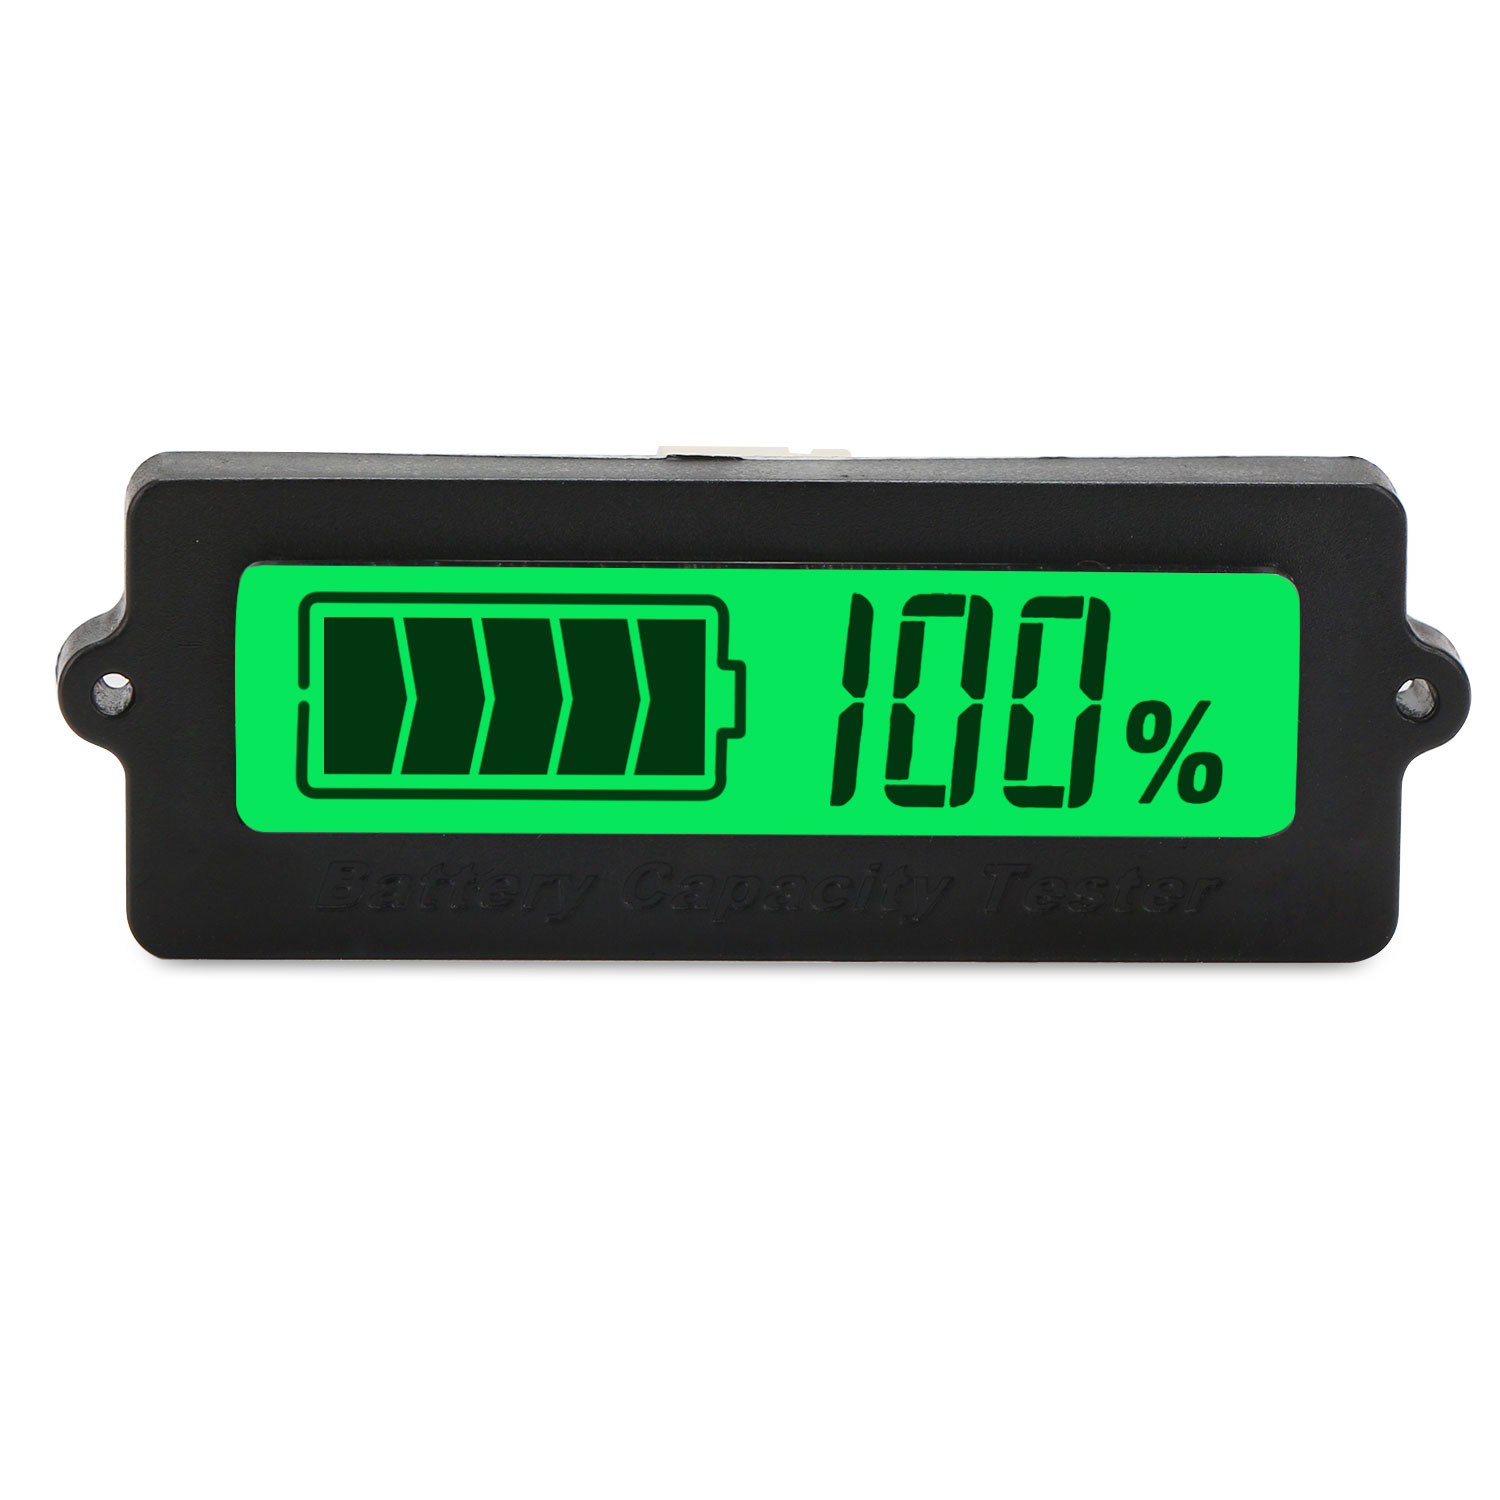 2 Pieces 12V 24V 36V 48V Battery Voltage Meter Battery Monitor Panel Gauge Digital Capacity Indicator Multifunction Battery Monitor with LCD Display Green Backlight 2-15s Lithium Battery for car 